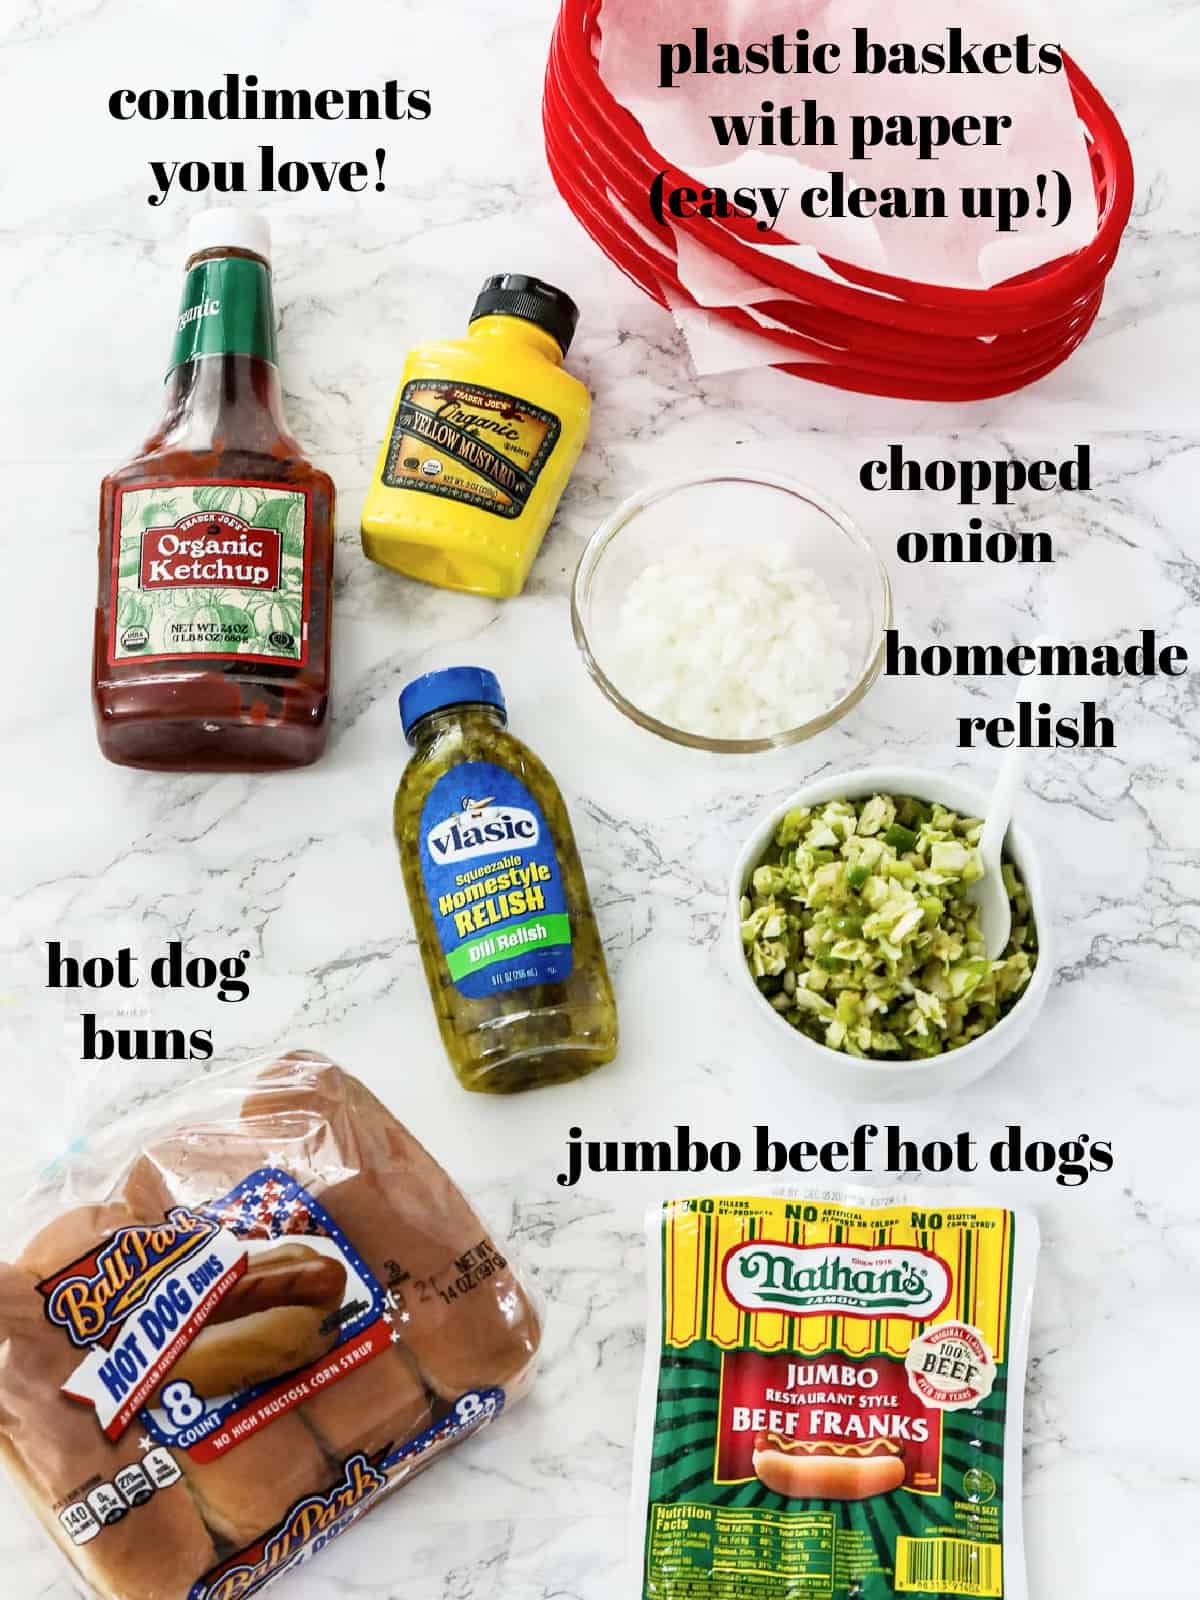 All the ingredients to make grilled hot dogs for a cookout laying on a table and labled.